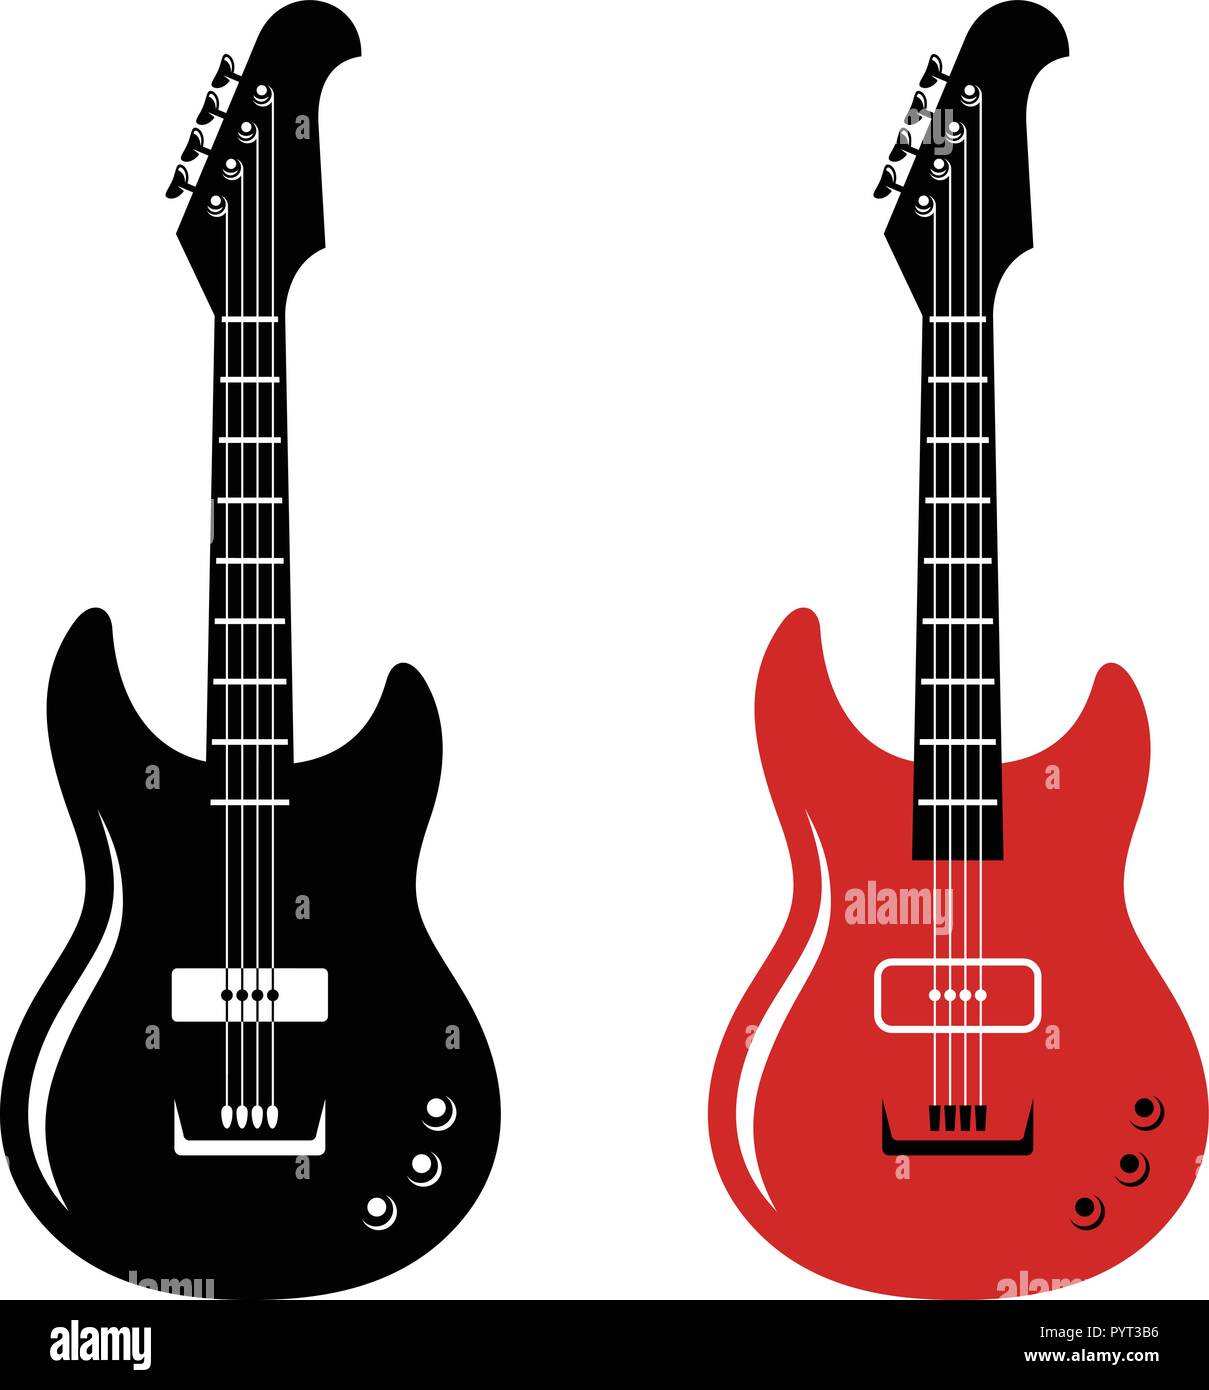 Electric guitars. Guitar silhouettes. Vector illustration Stock Vector